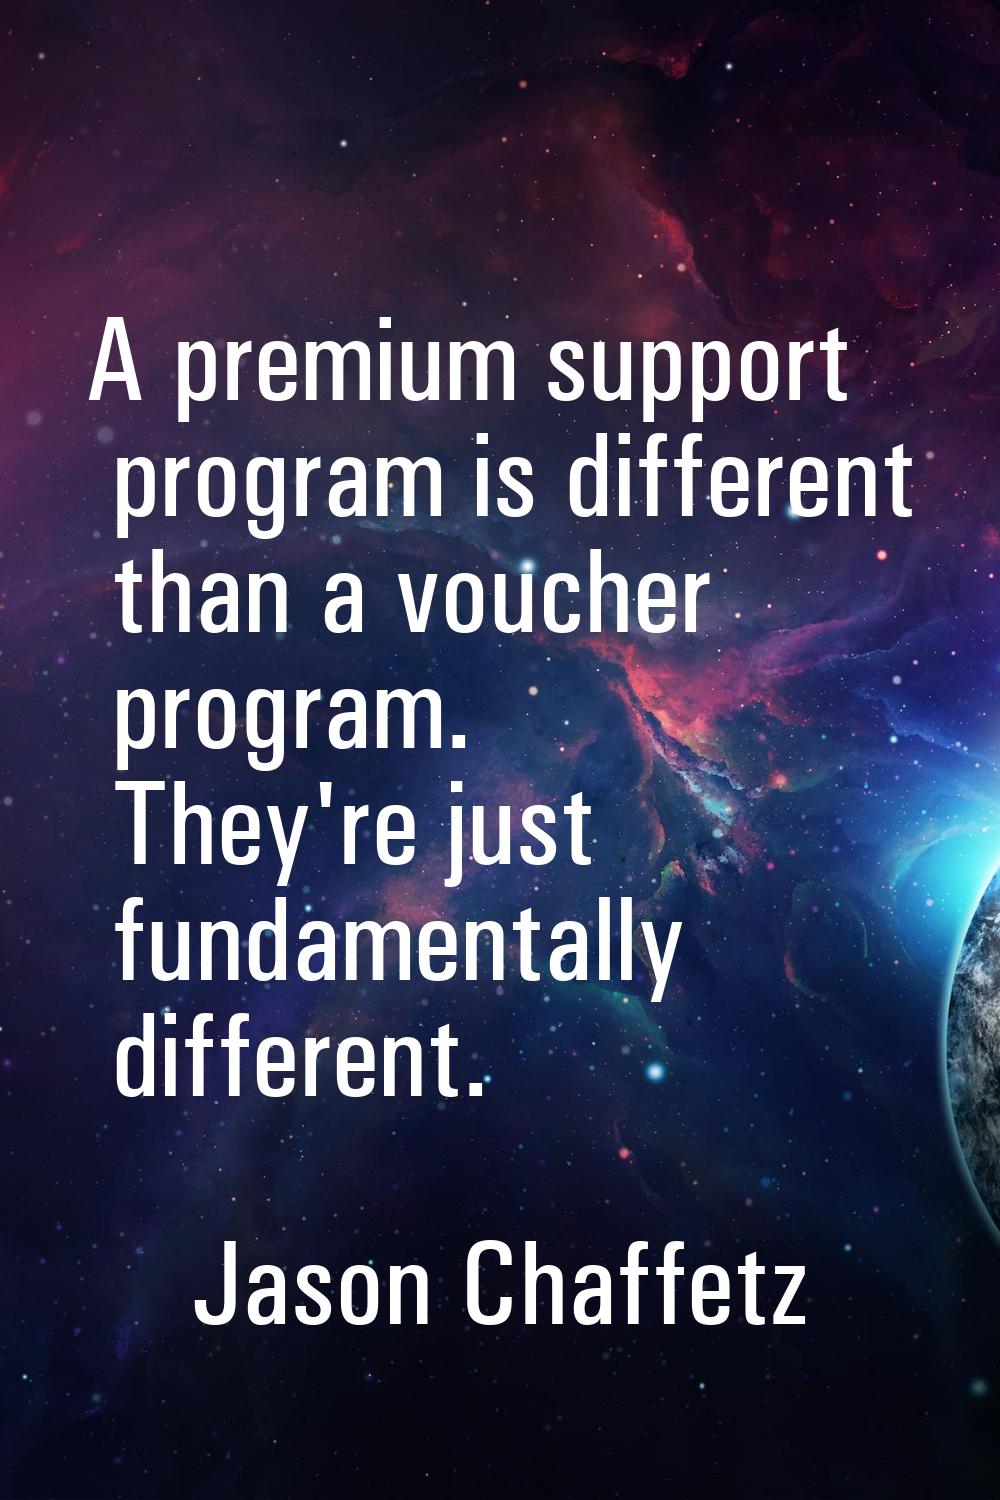 A premium support program is different than a voucher program. They're just fundamentally different